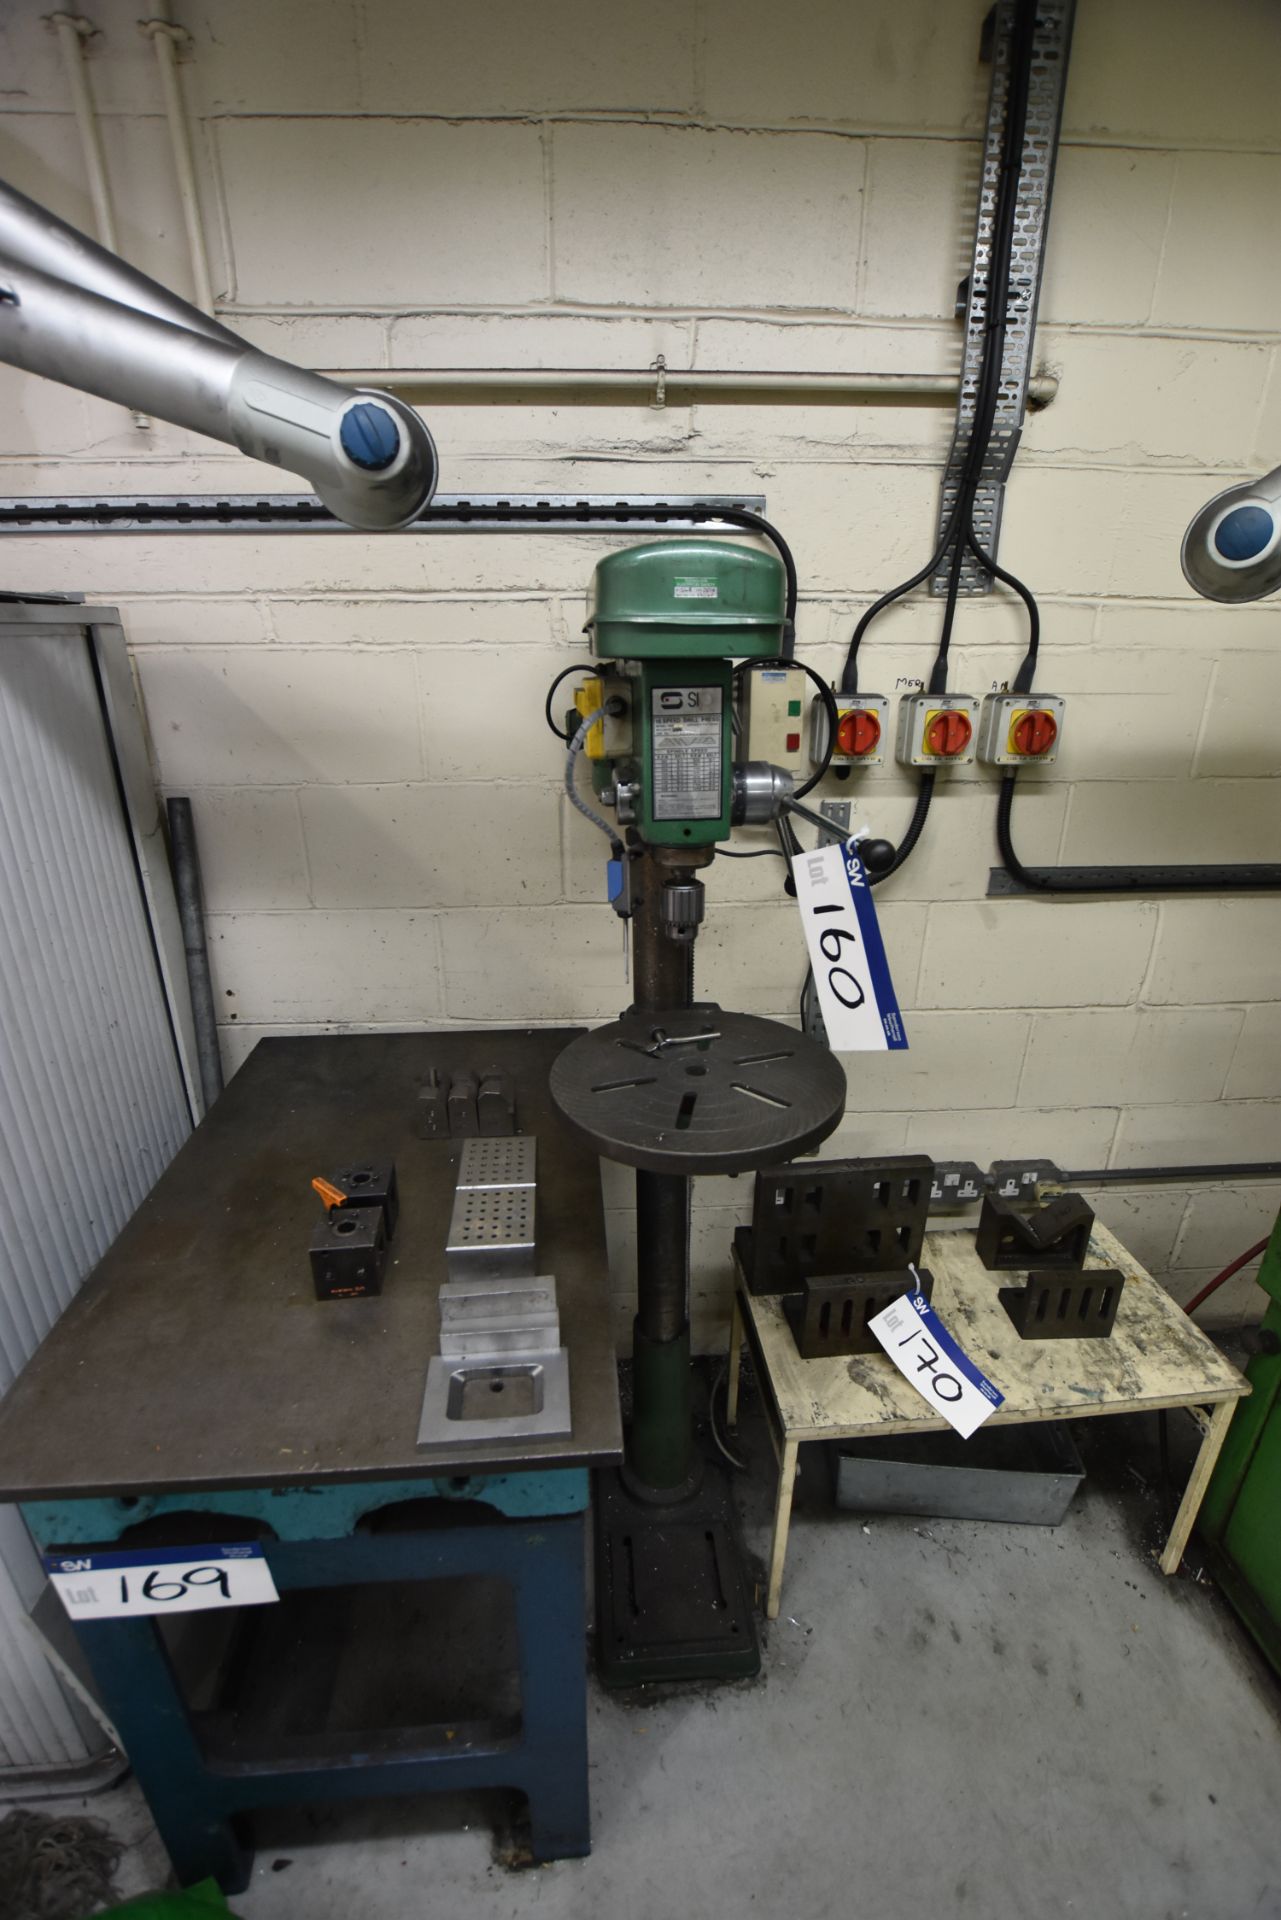 SIP Model HDP 800F 16 Speed Drill Press, throat 220mm, year: 2000, serial number: 1177220